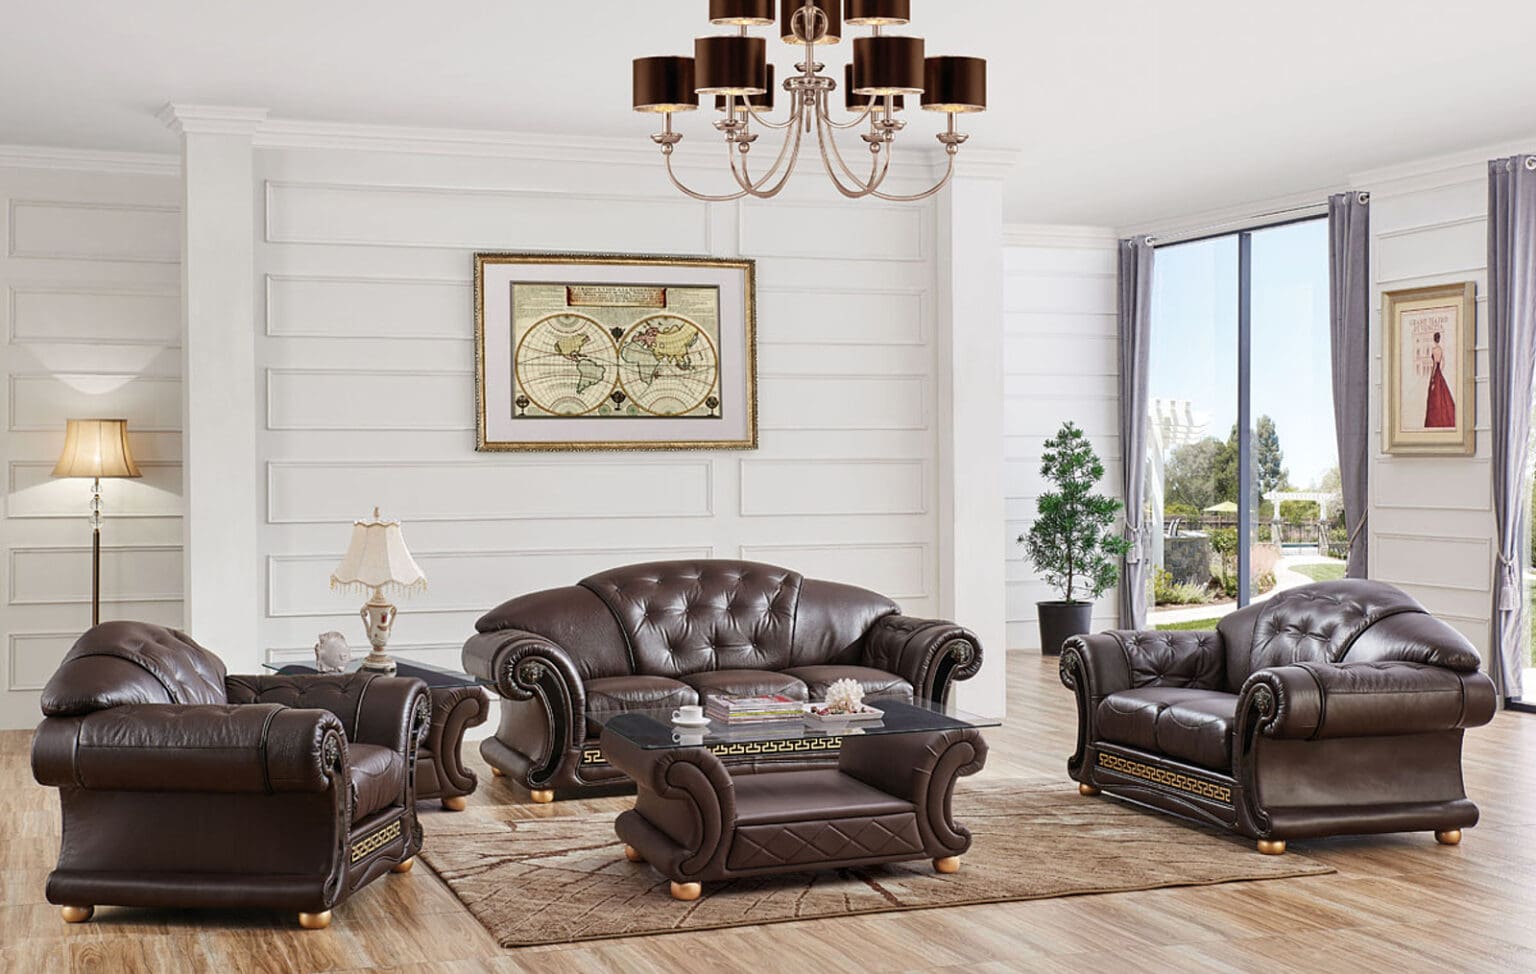 Luxurious Esf Apolo Brown Living Room Set Unique Furniture